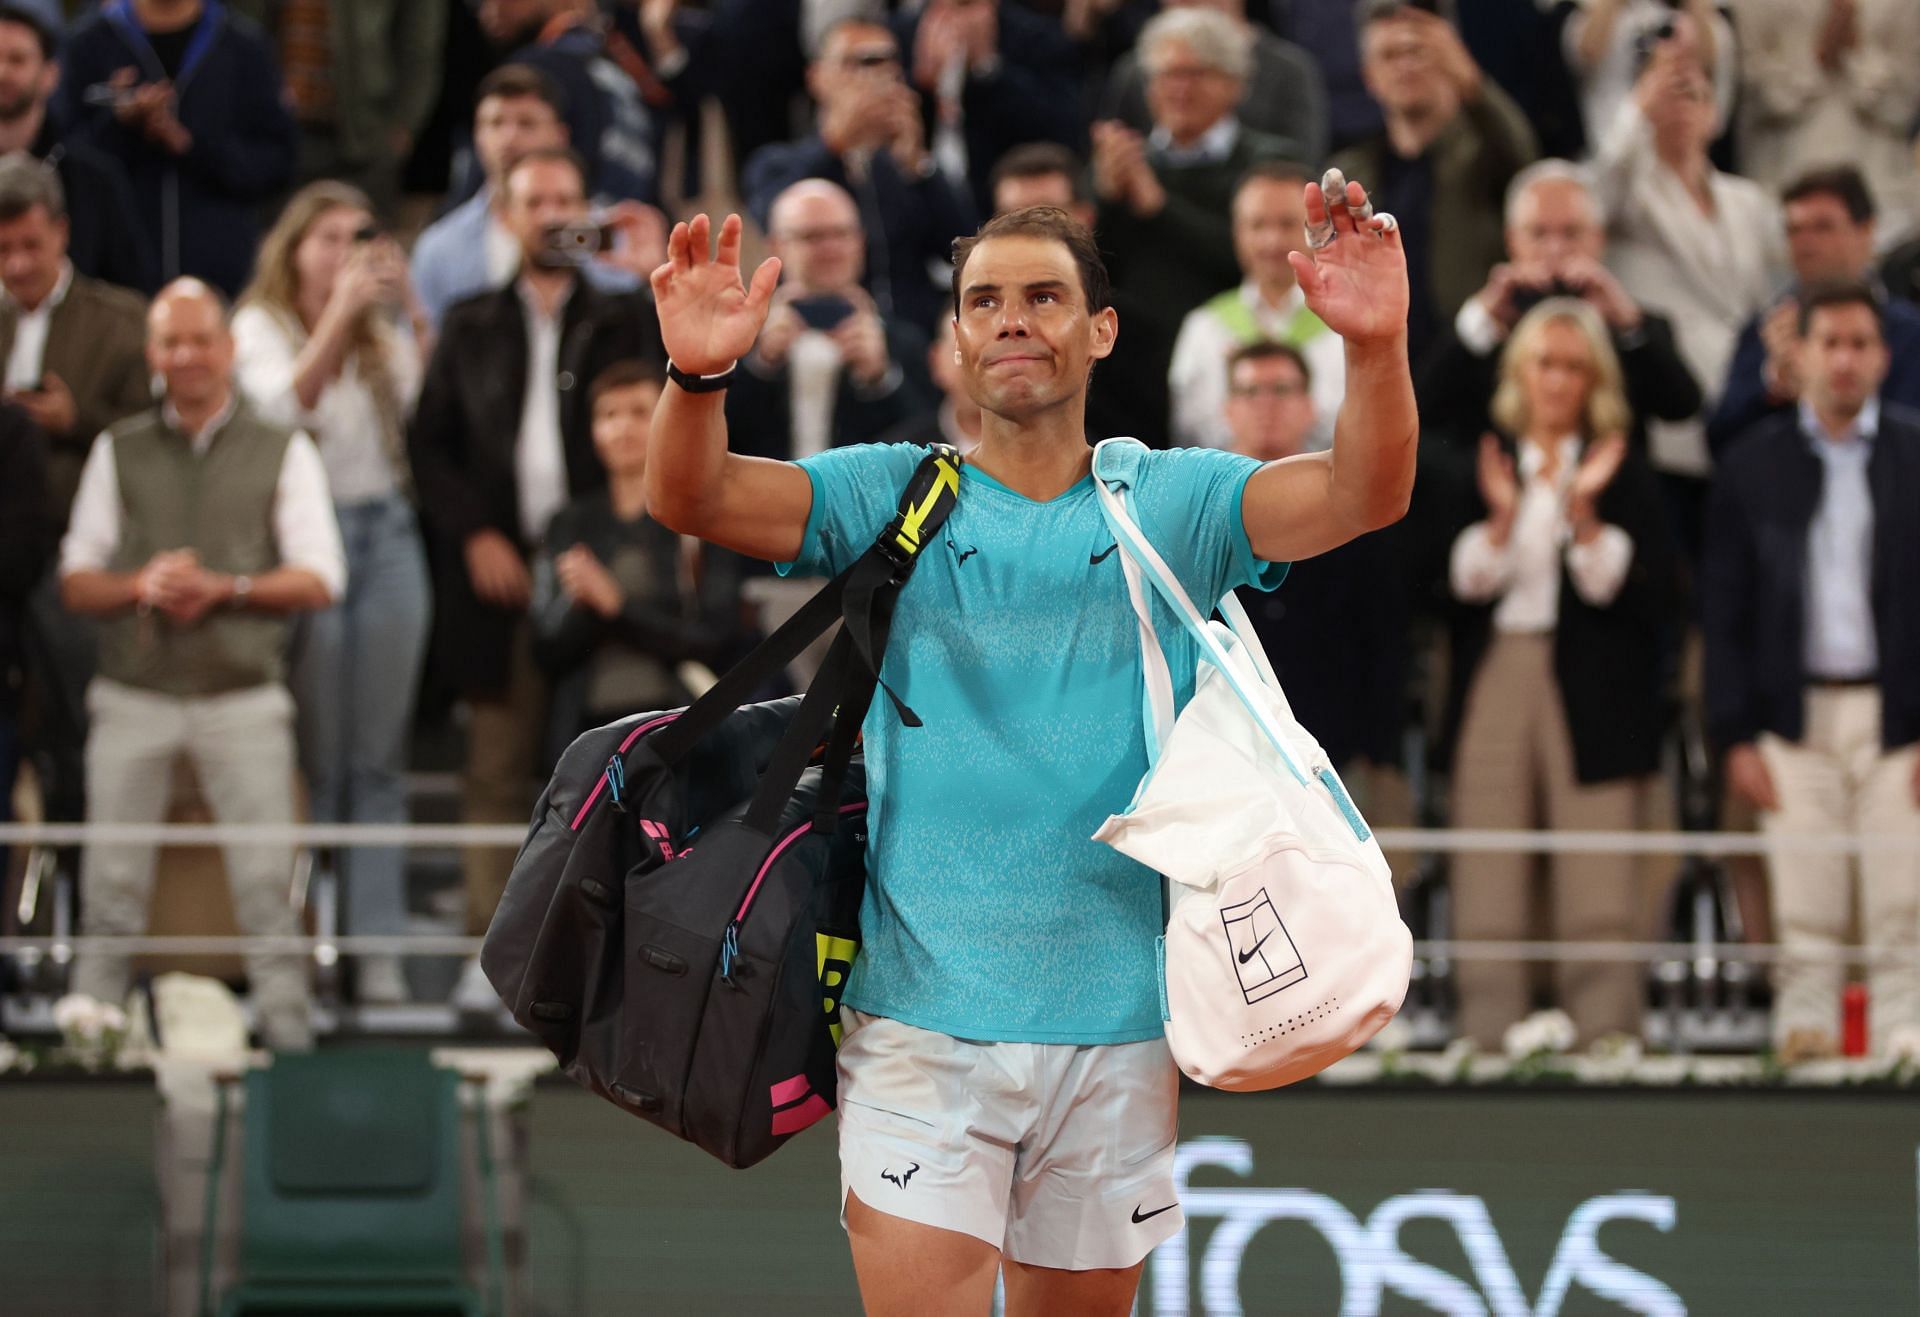 "Very difficult" Rafael Nadal still elusive on whether he will retire